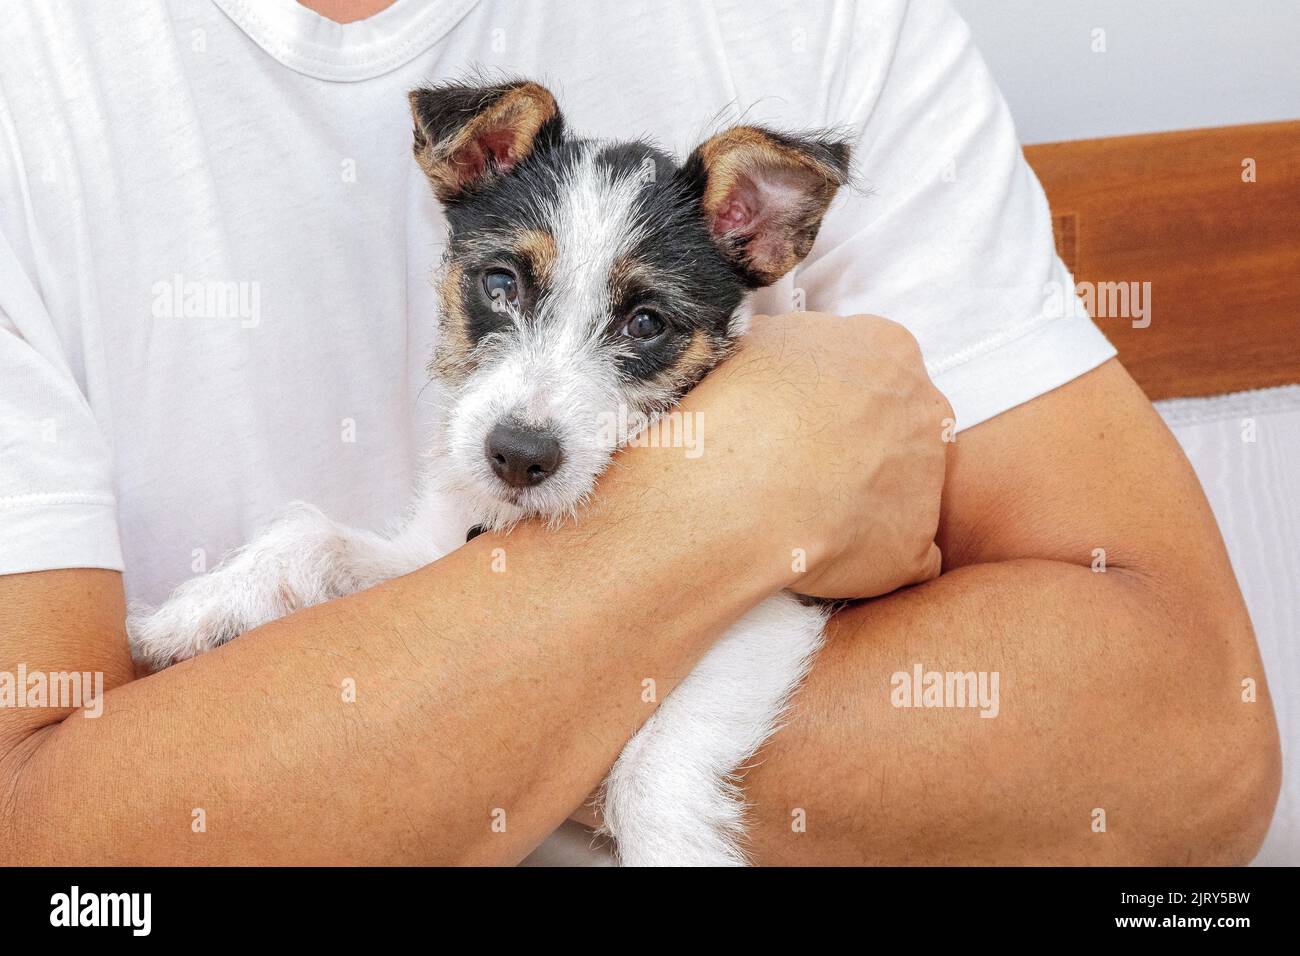 Adult male holding a Jack Russell puppy in his arms Stock Photo